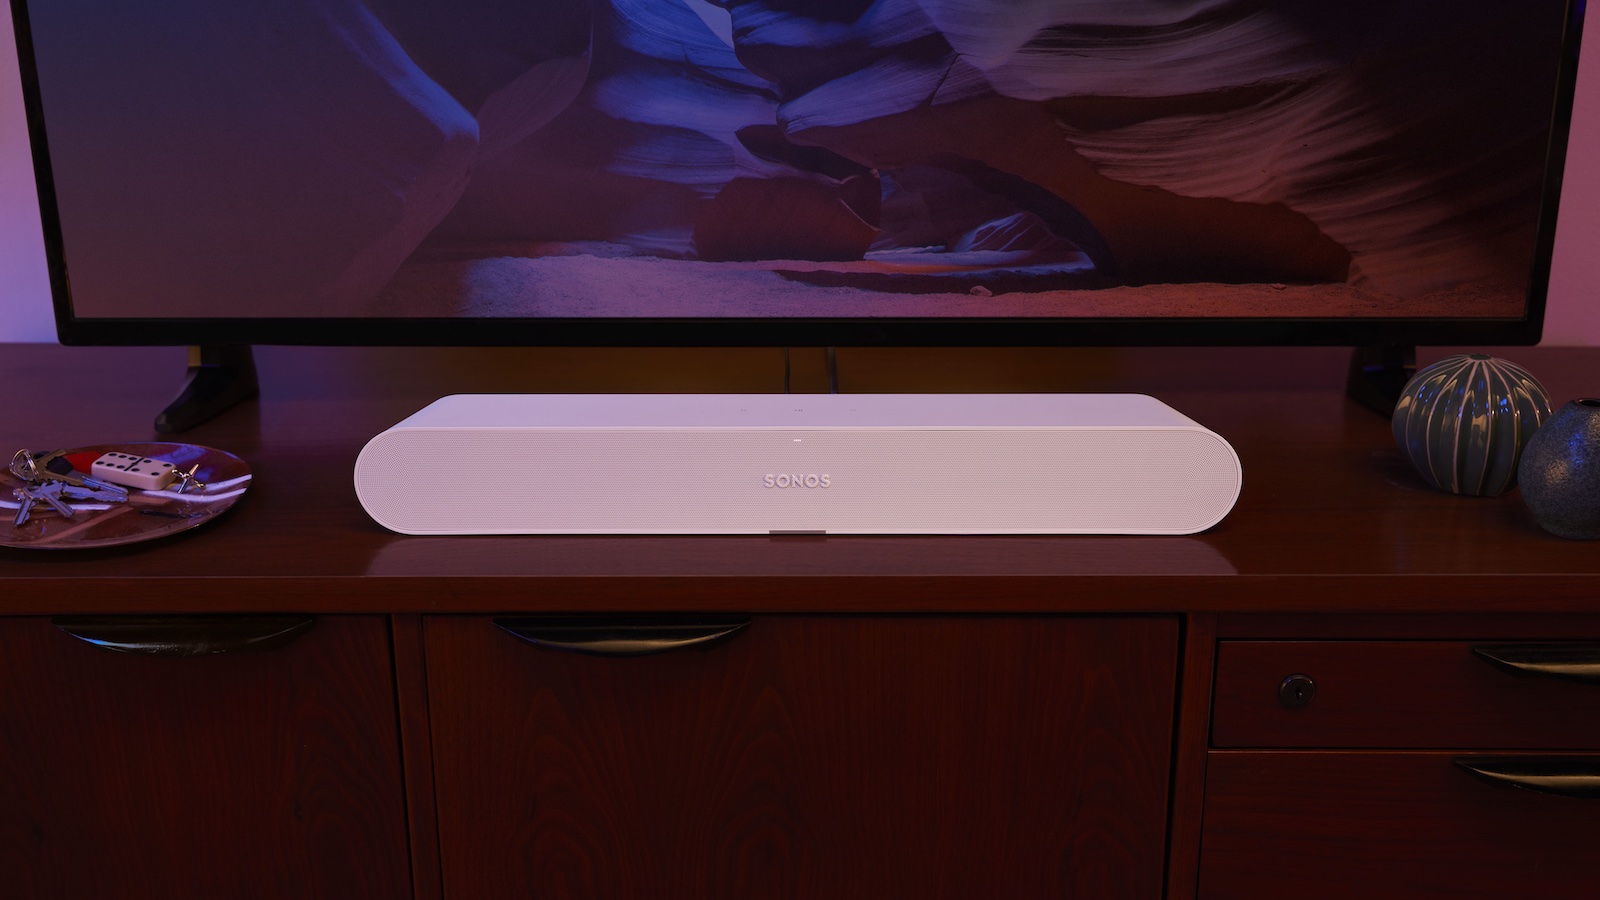 Sonos Announces Lower-Priced Soundbar With AirPlay 2 Support, ‘Hey Sonos’ Voice Control for Apple Music